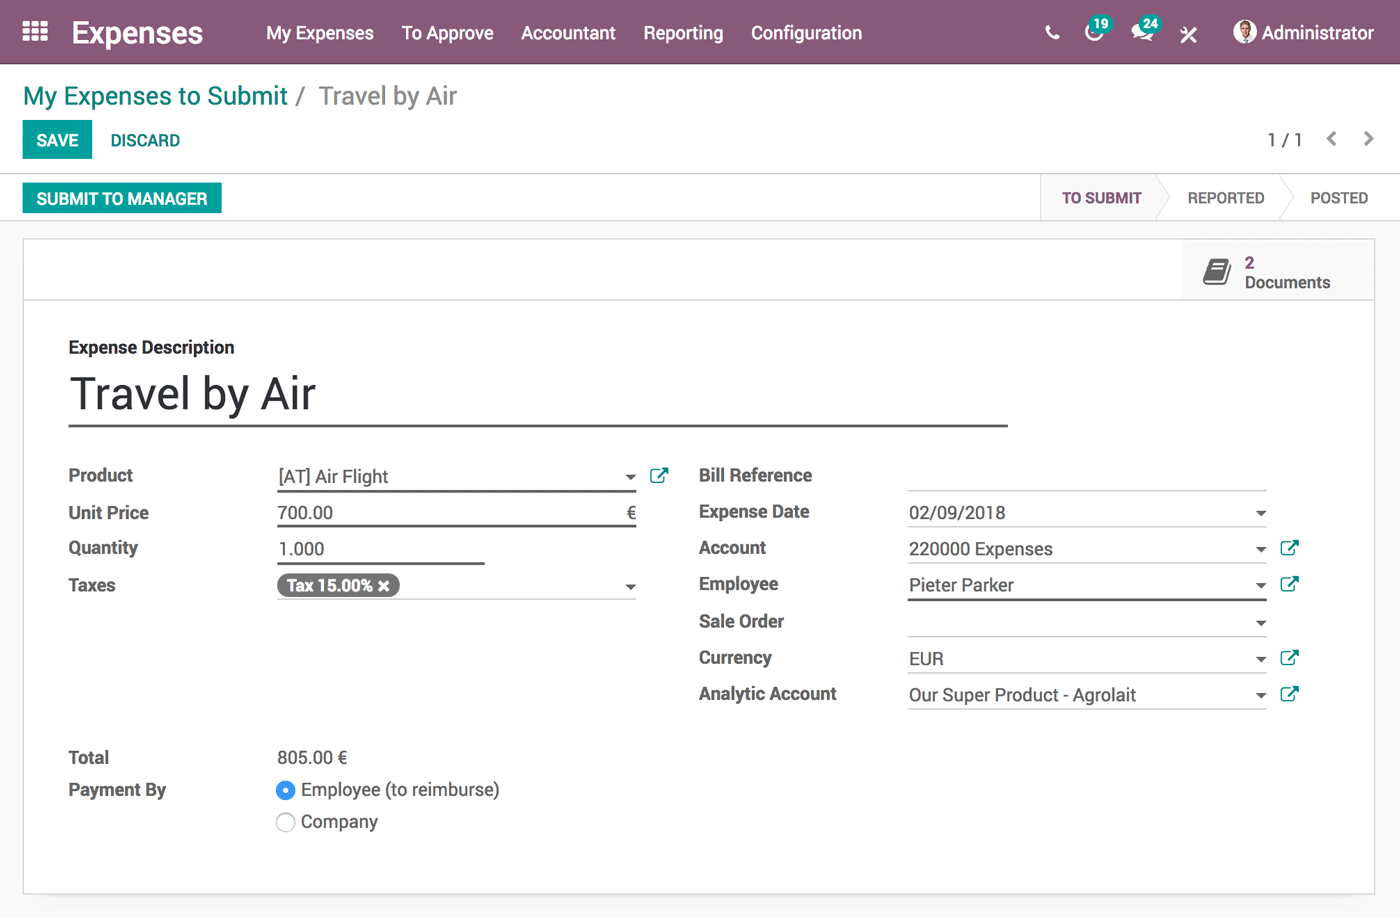 Odoo Expenses interface showing a travel expense being submitted